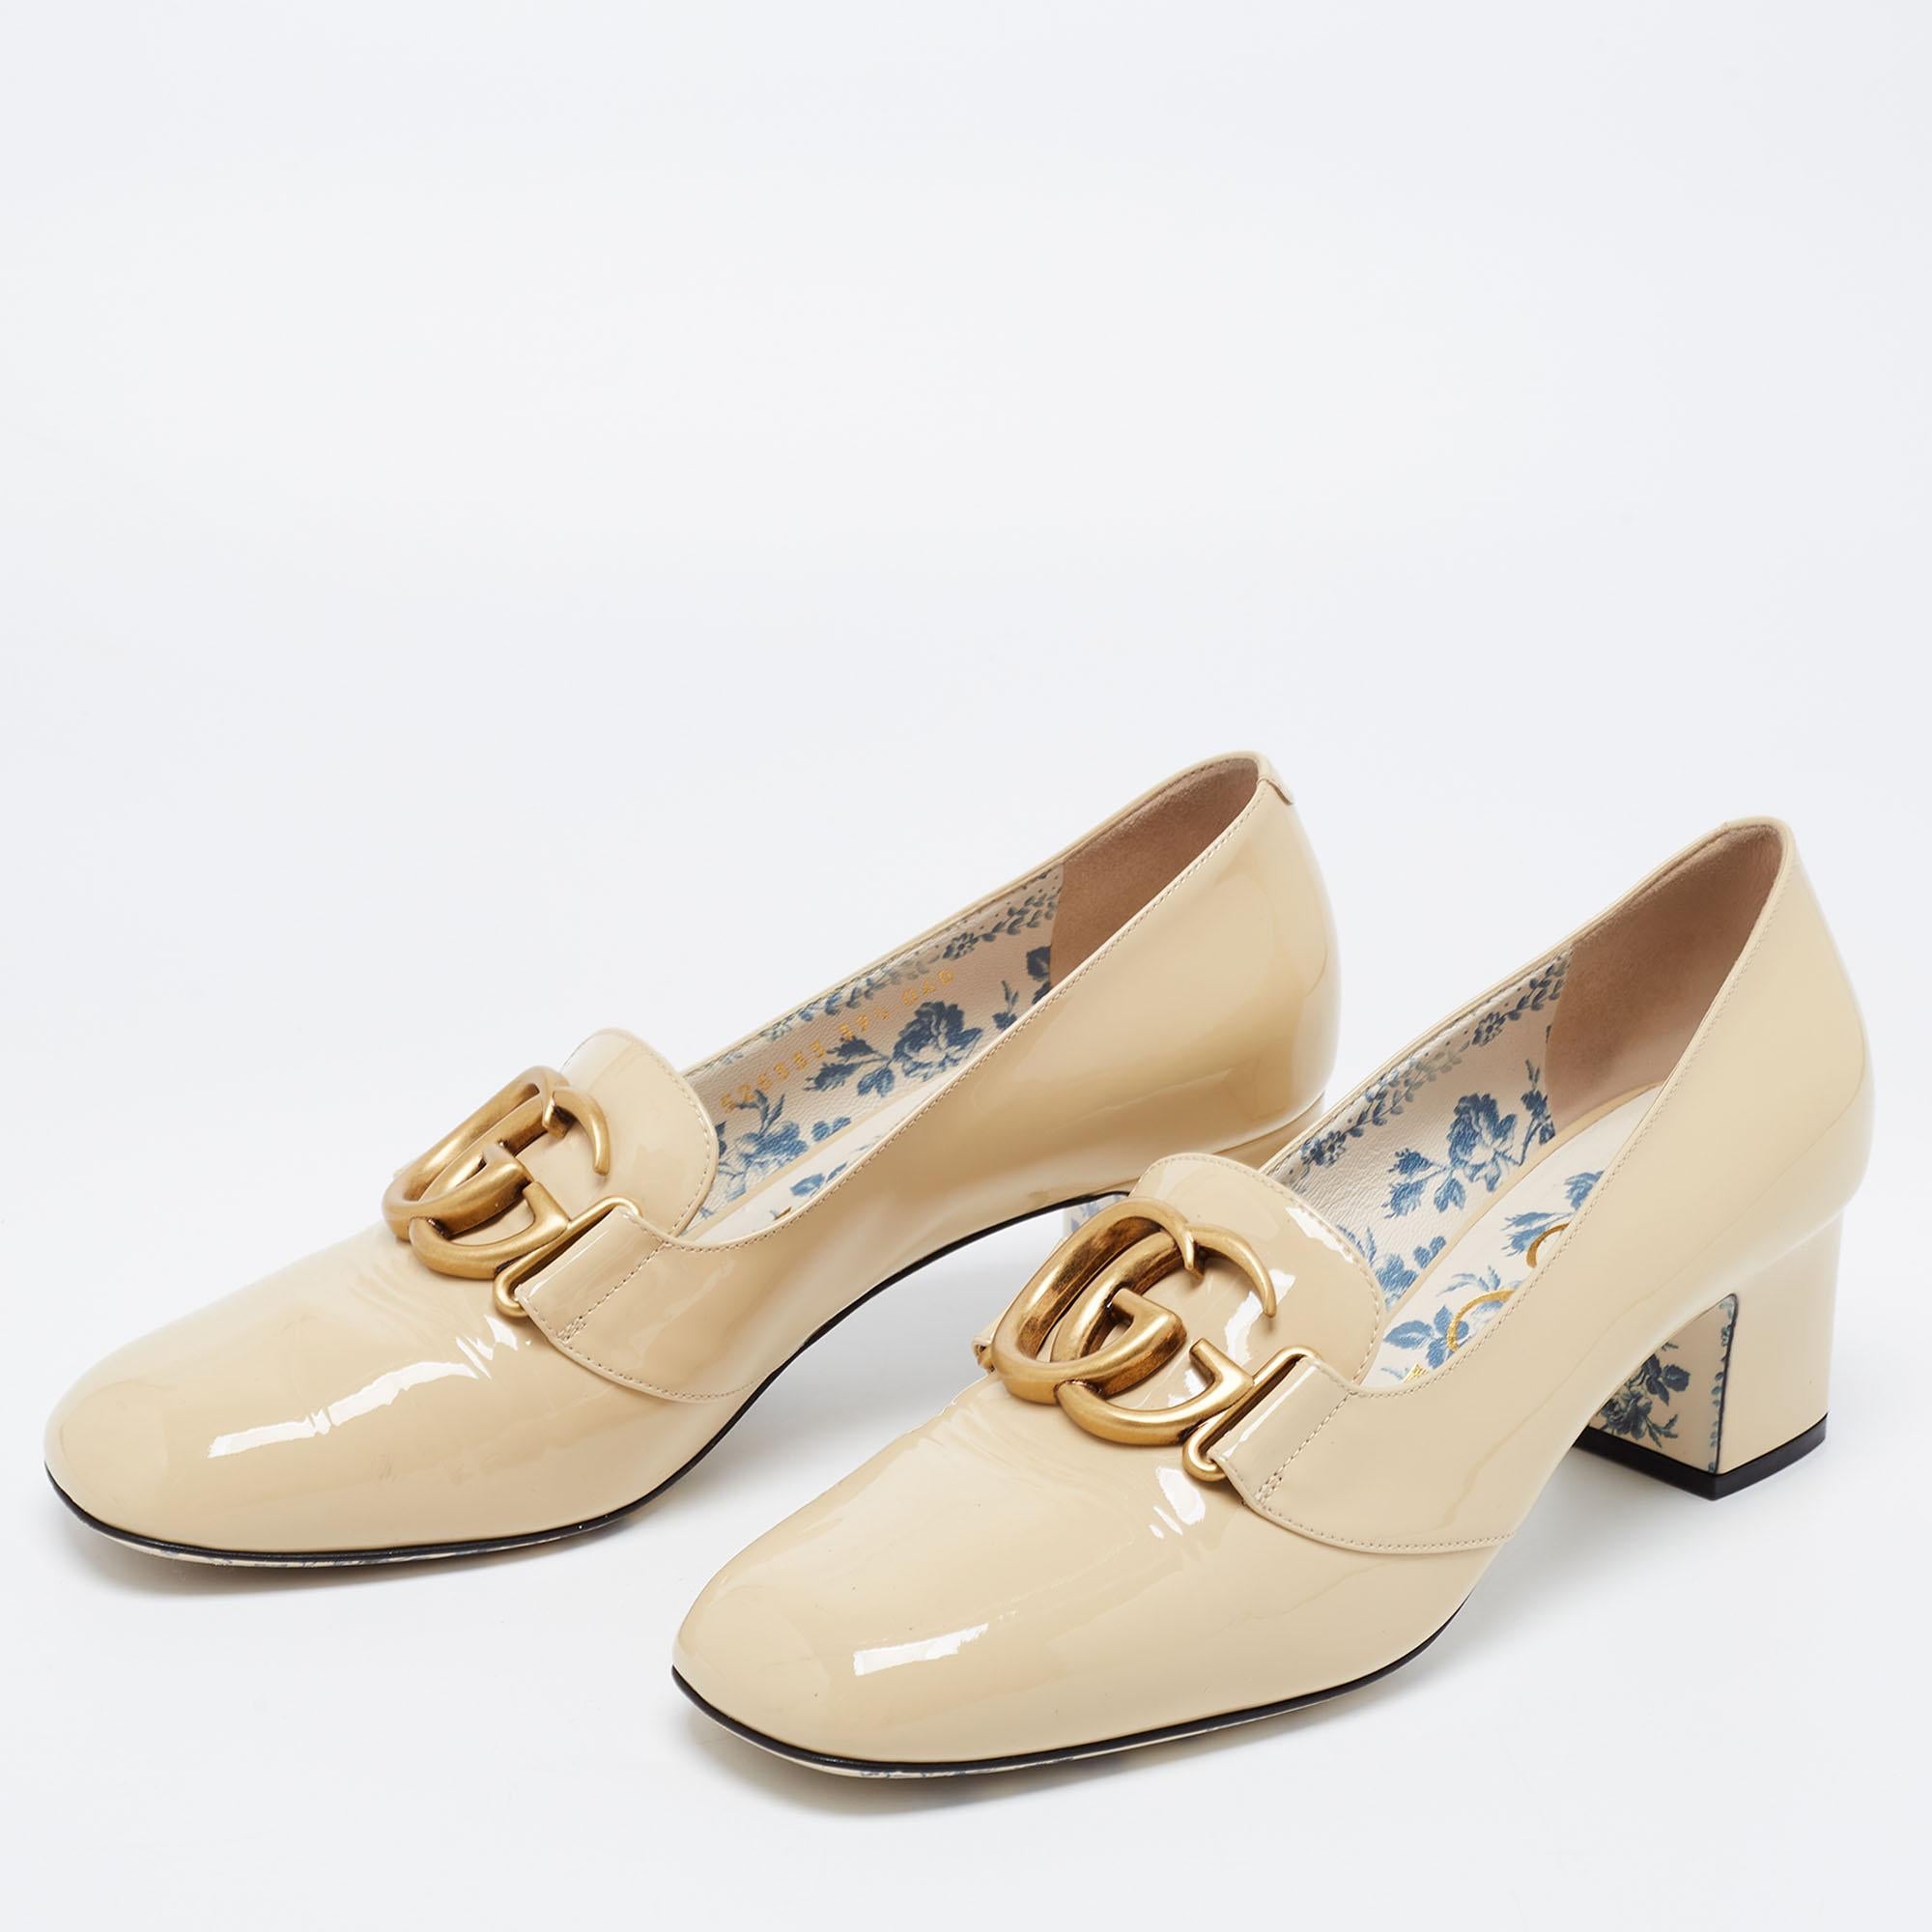 Gucci brings its signatory aesthetic into the limelight with these gorgeous Victoire pumps. Draped in beige patent leather, a gold-toned GG motif is placed atop the vamps for an iconic touch. They are complemented with block heels, a slip-on